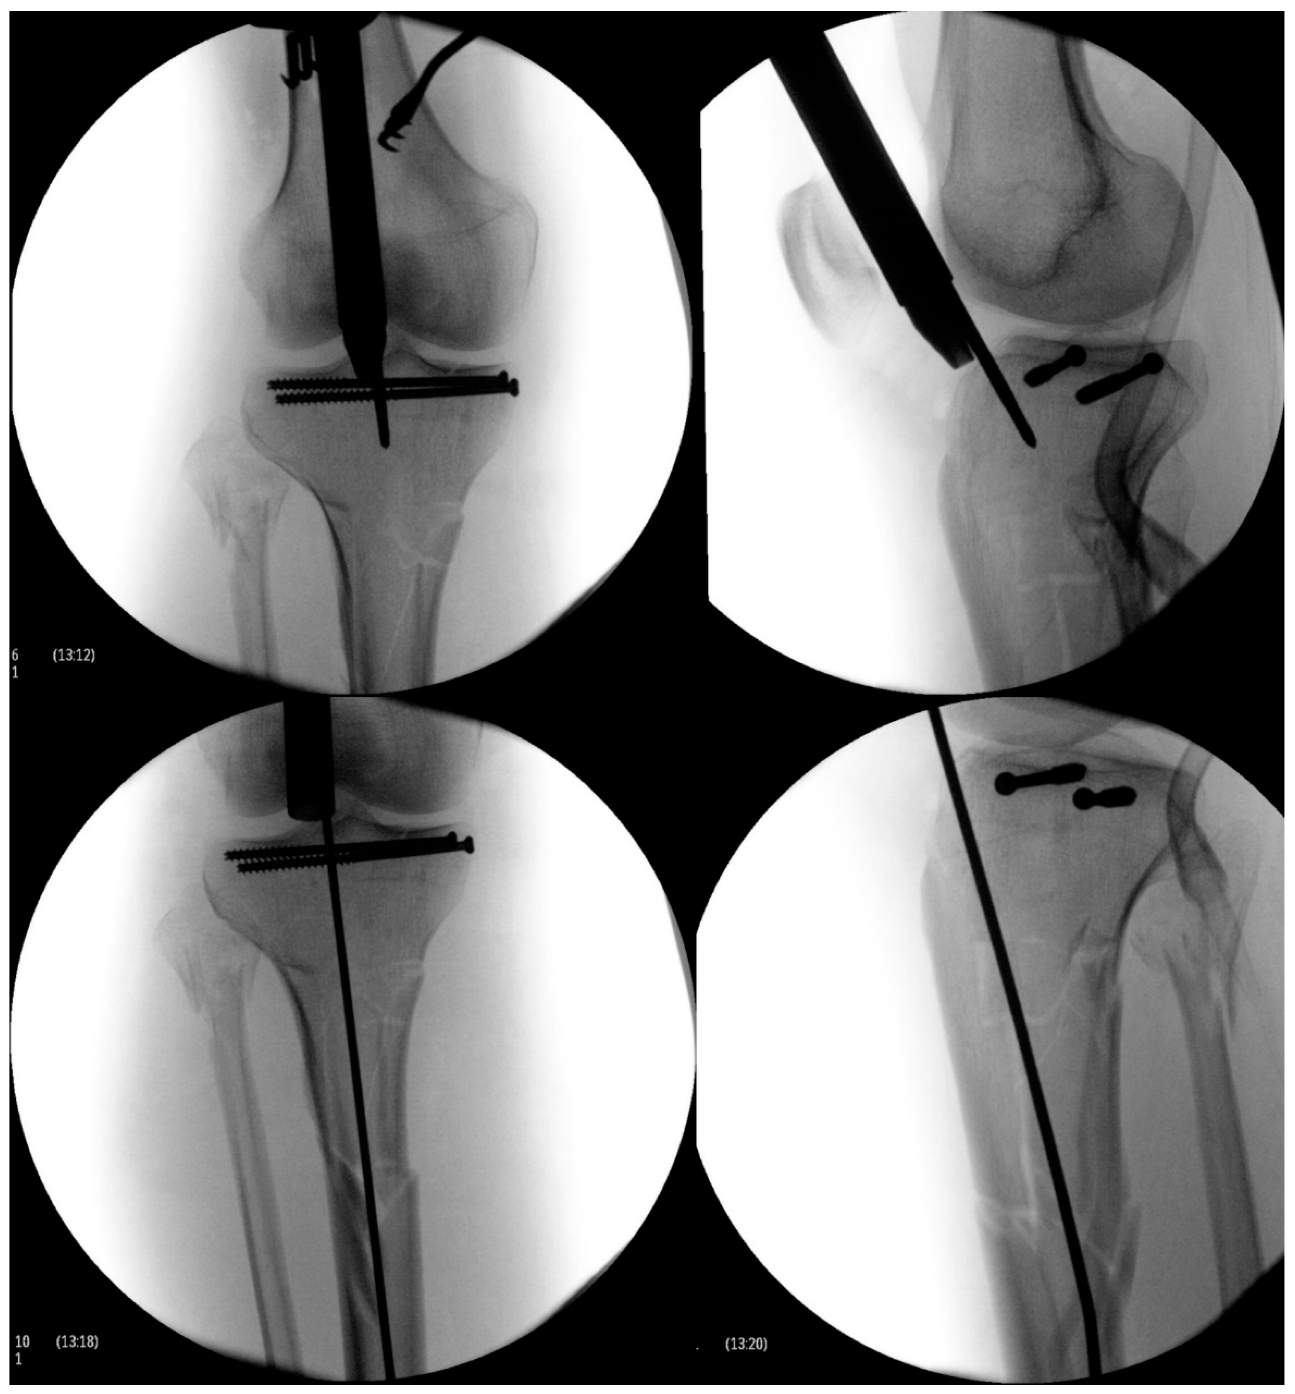 Complex Tibial Fractures: Tips and Tricks for Intramedullary Nail Fixation  - Michael Githens, Julius Bishop, 2014